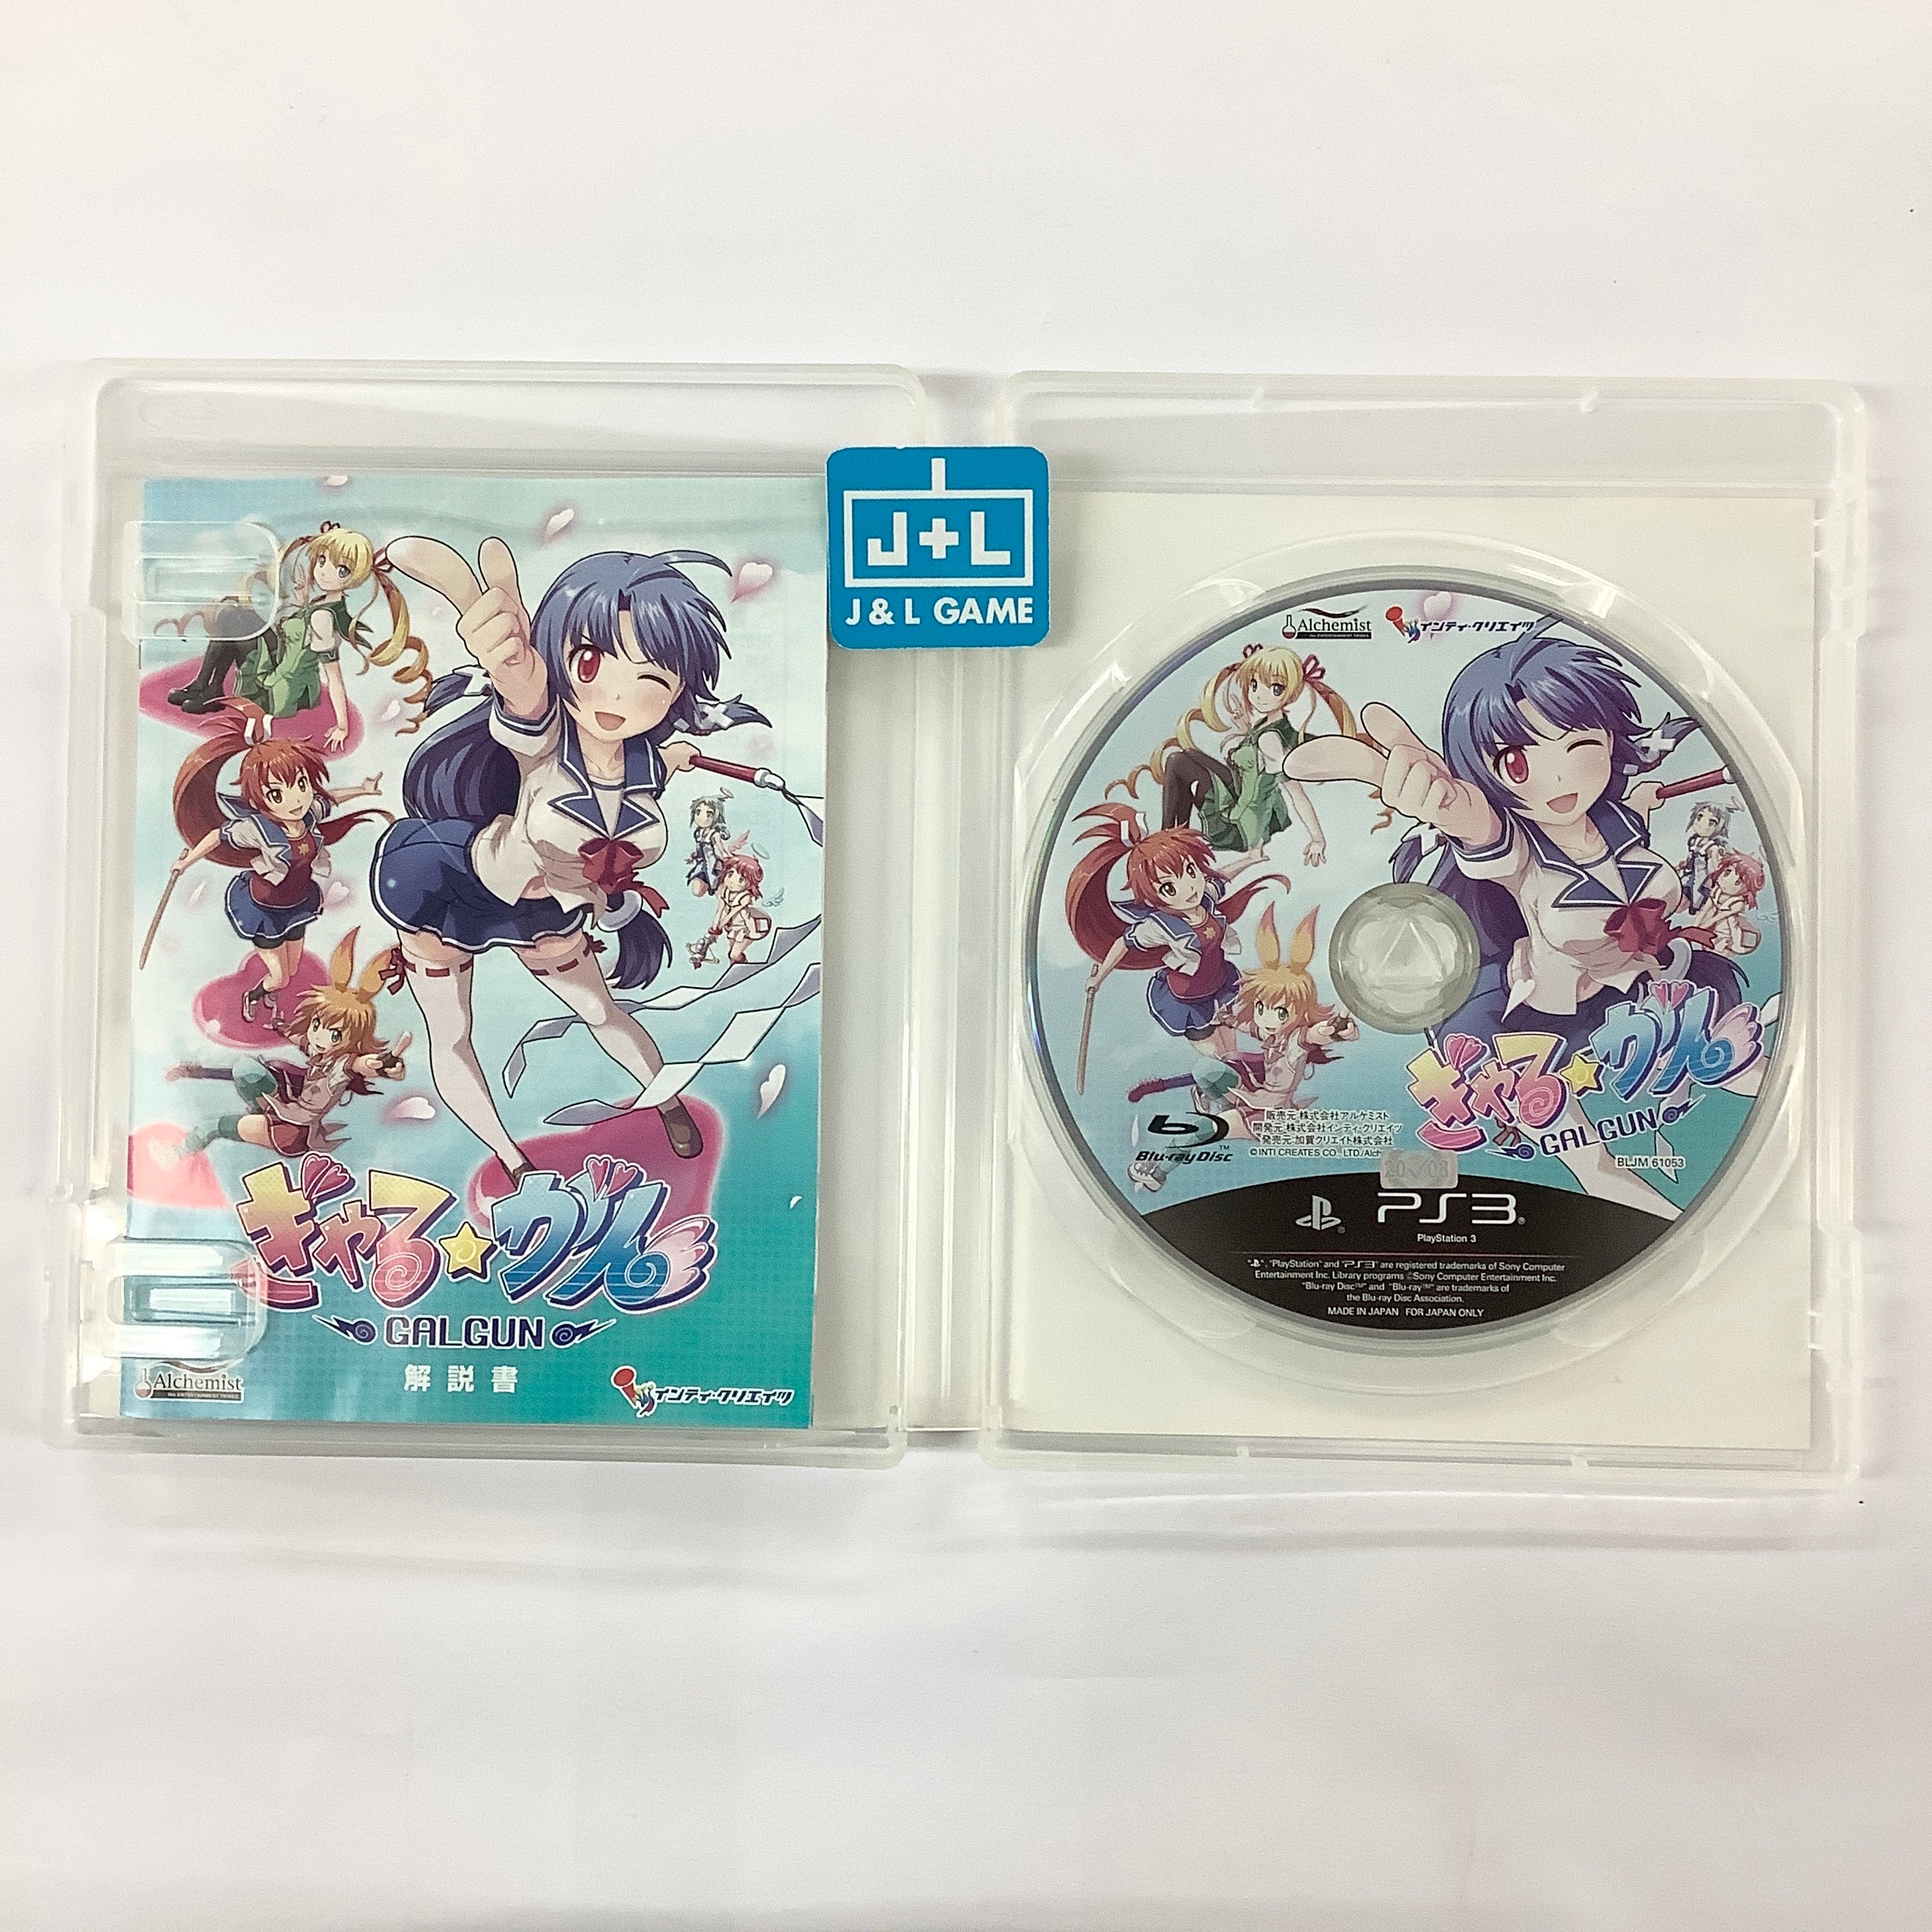 Gal*Gun (Best) - (PS3) PlayStation 3 [Pre-Owned] (Japanese Import) Video Games Alchemist   